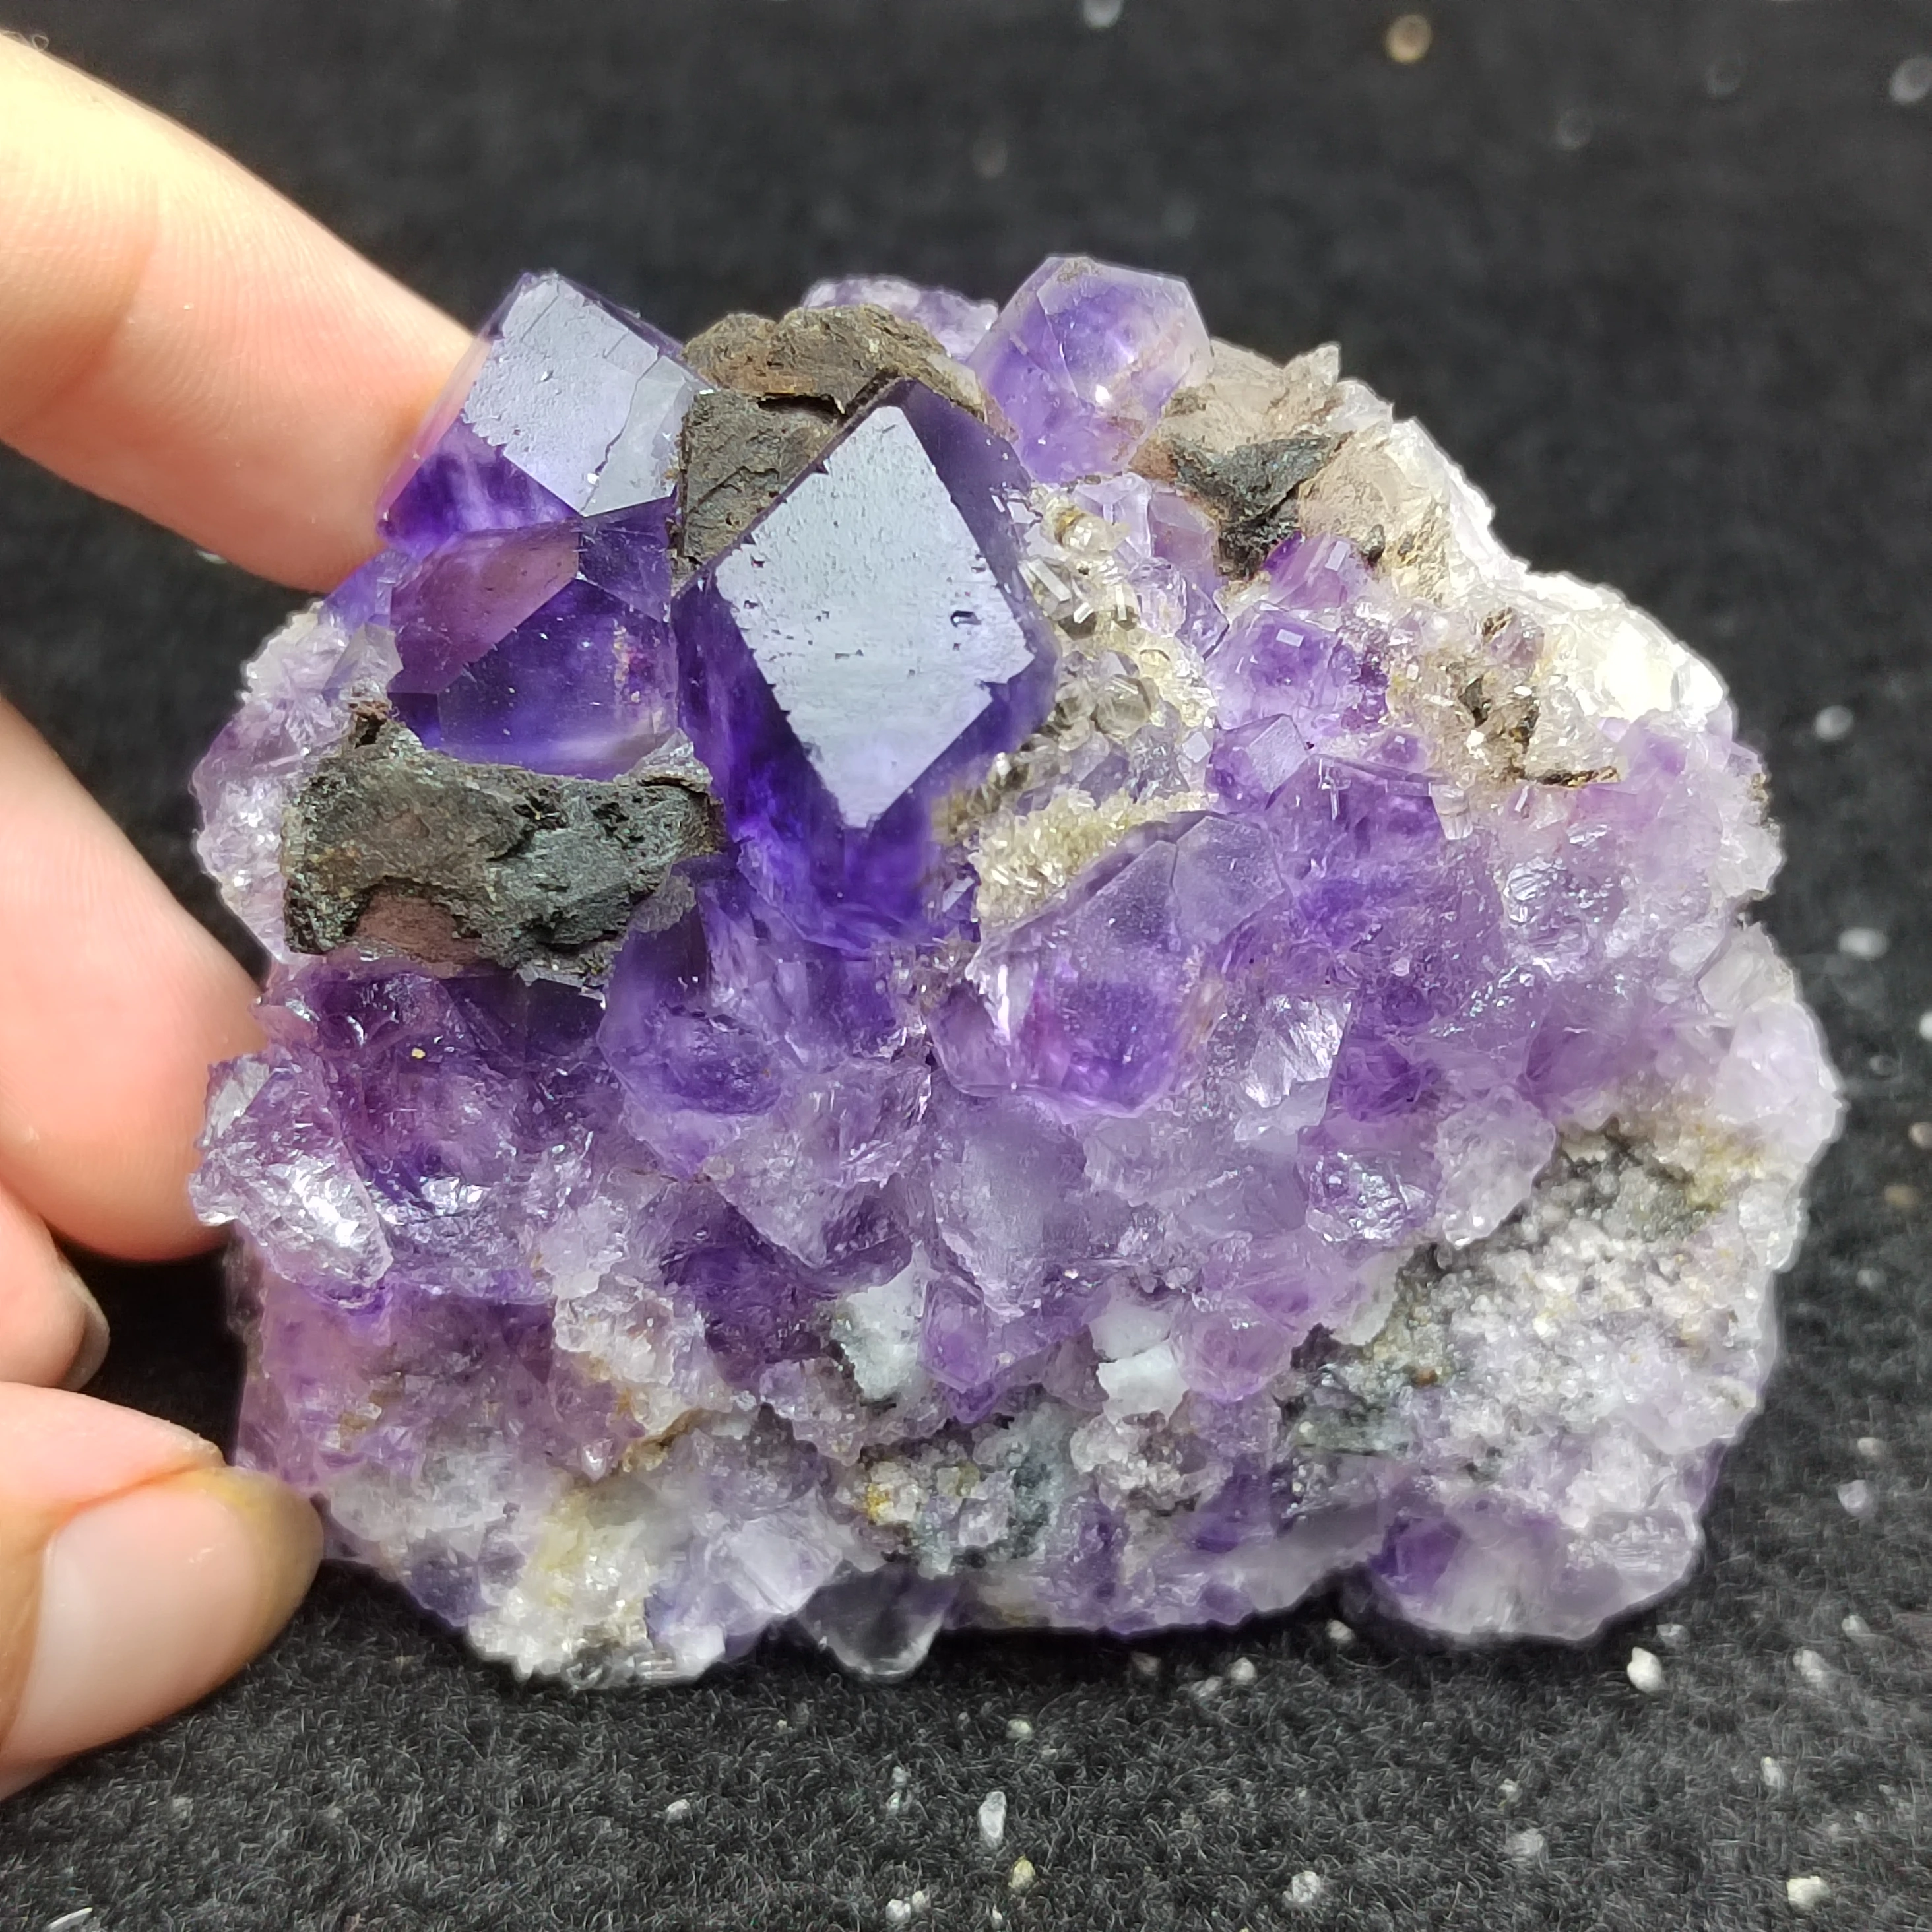 173.2gNatural purple blue fluorite and crystal symbiosis mineral healing energy specimen home decoration